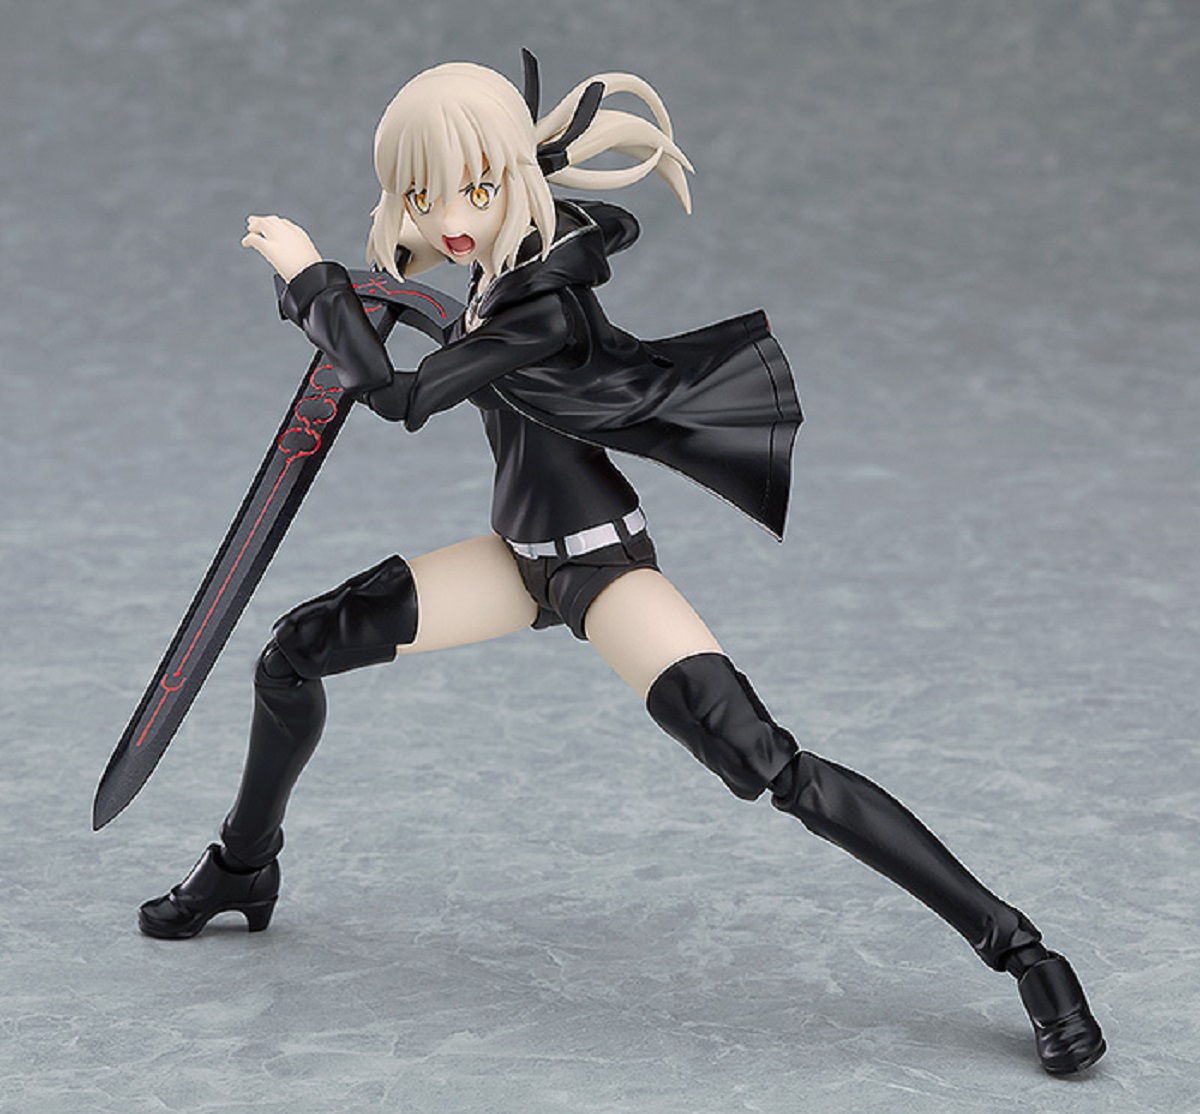 Fate Grand Order Figma Action Figure Saber Altria Pendragon Images, Photos, Reviews